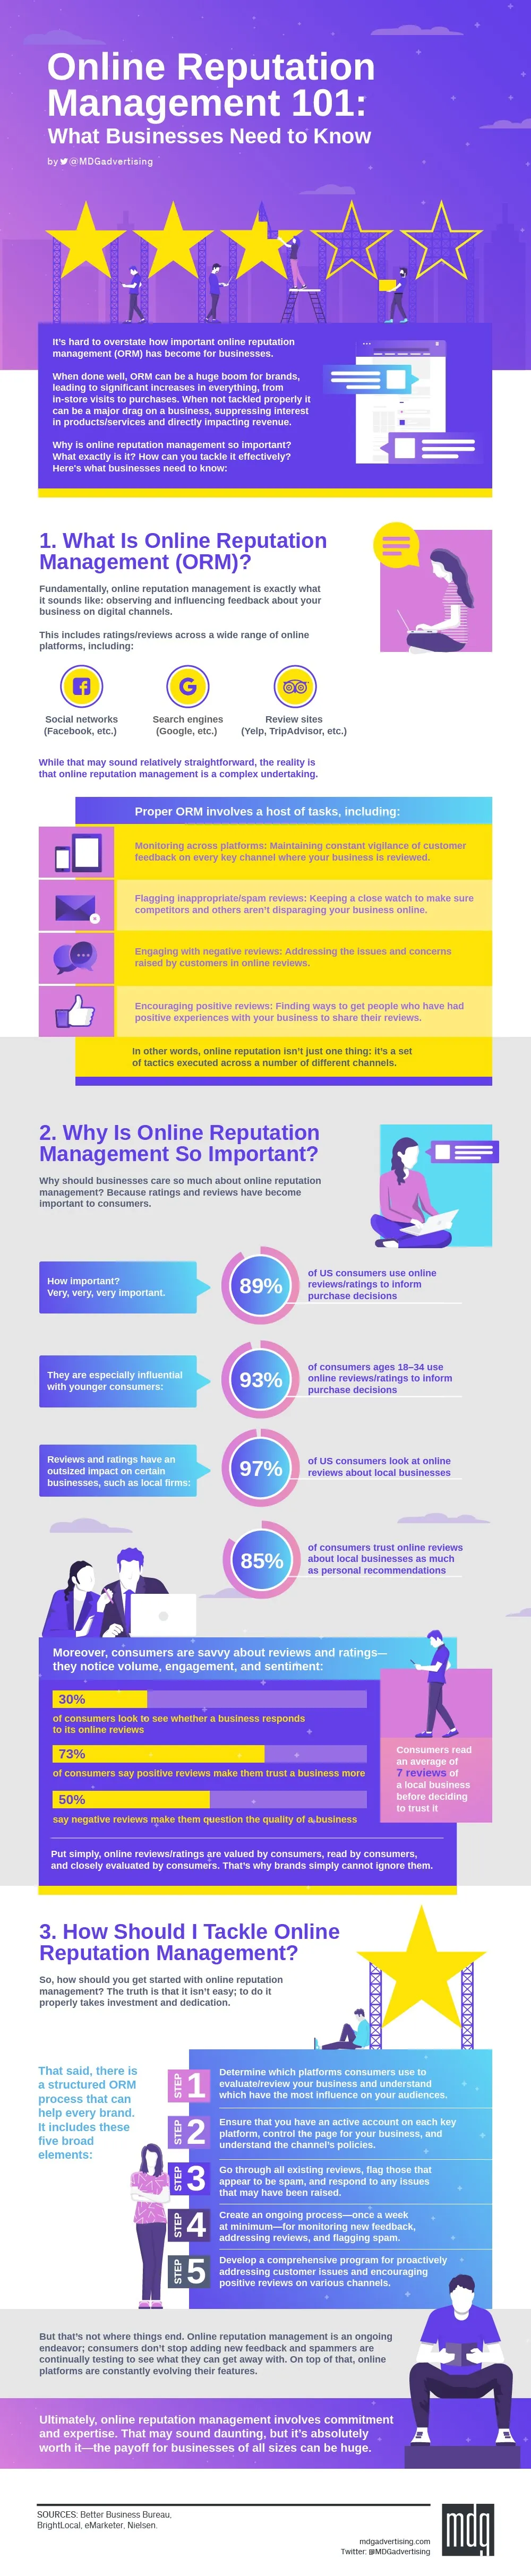 The Importance of Online Reputation Management for Your Business (infographic)